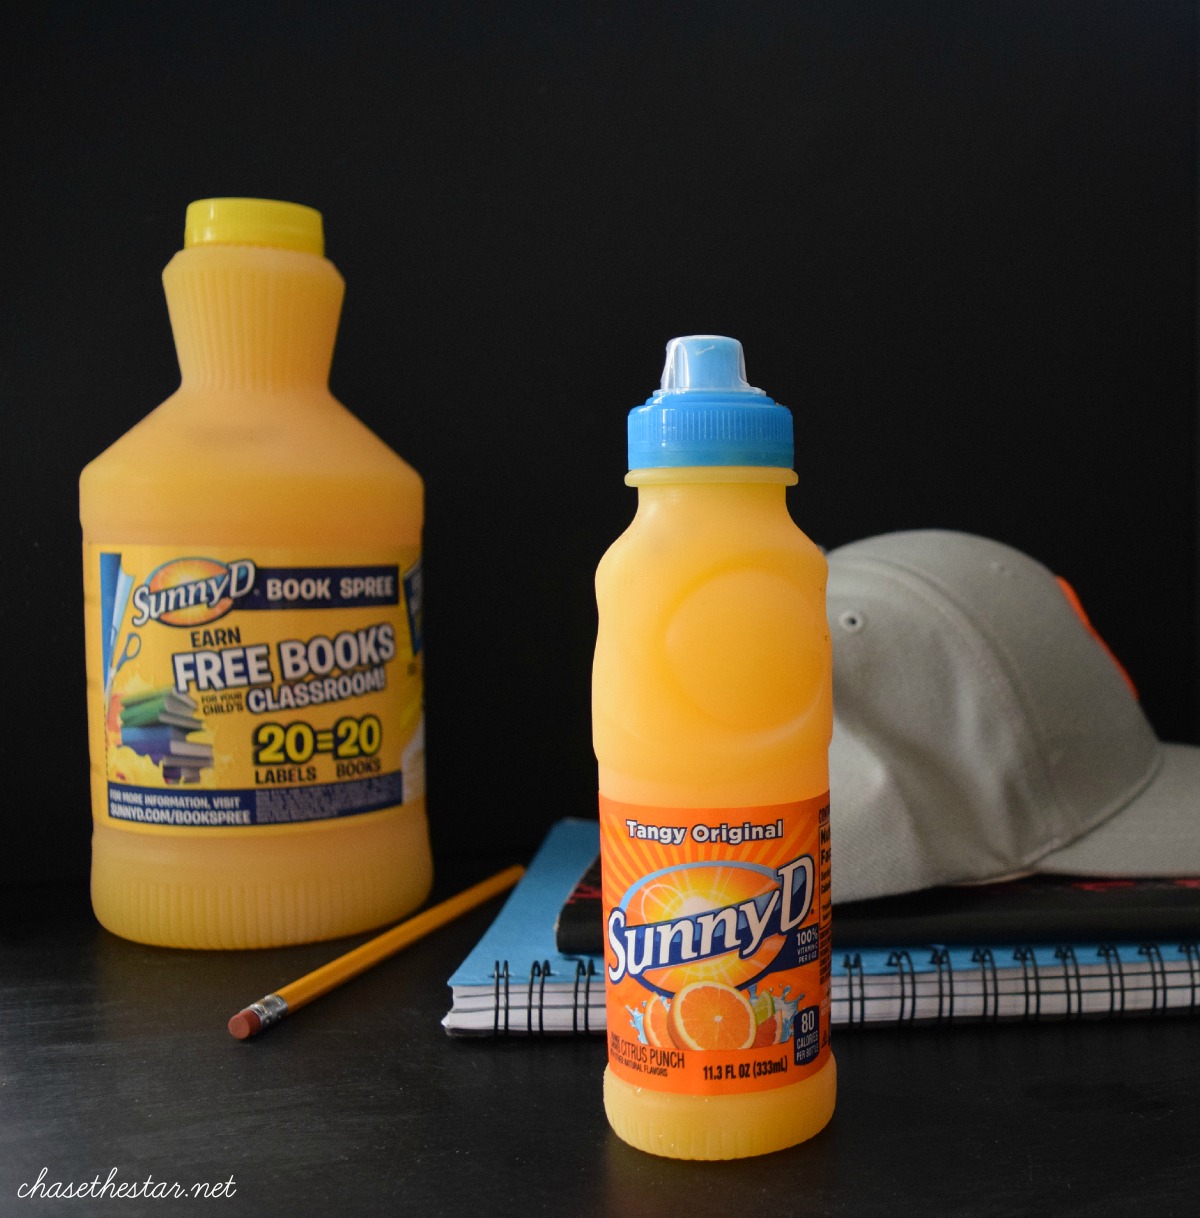 SunnyD is a great way to keep kids healthy in between school and sports! #KeepItSunny #ad #PMedia